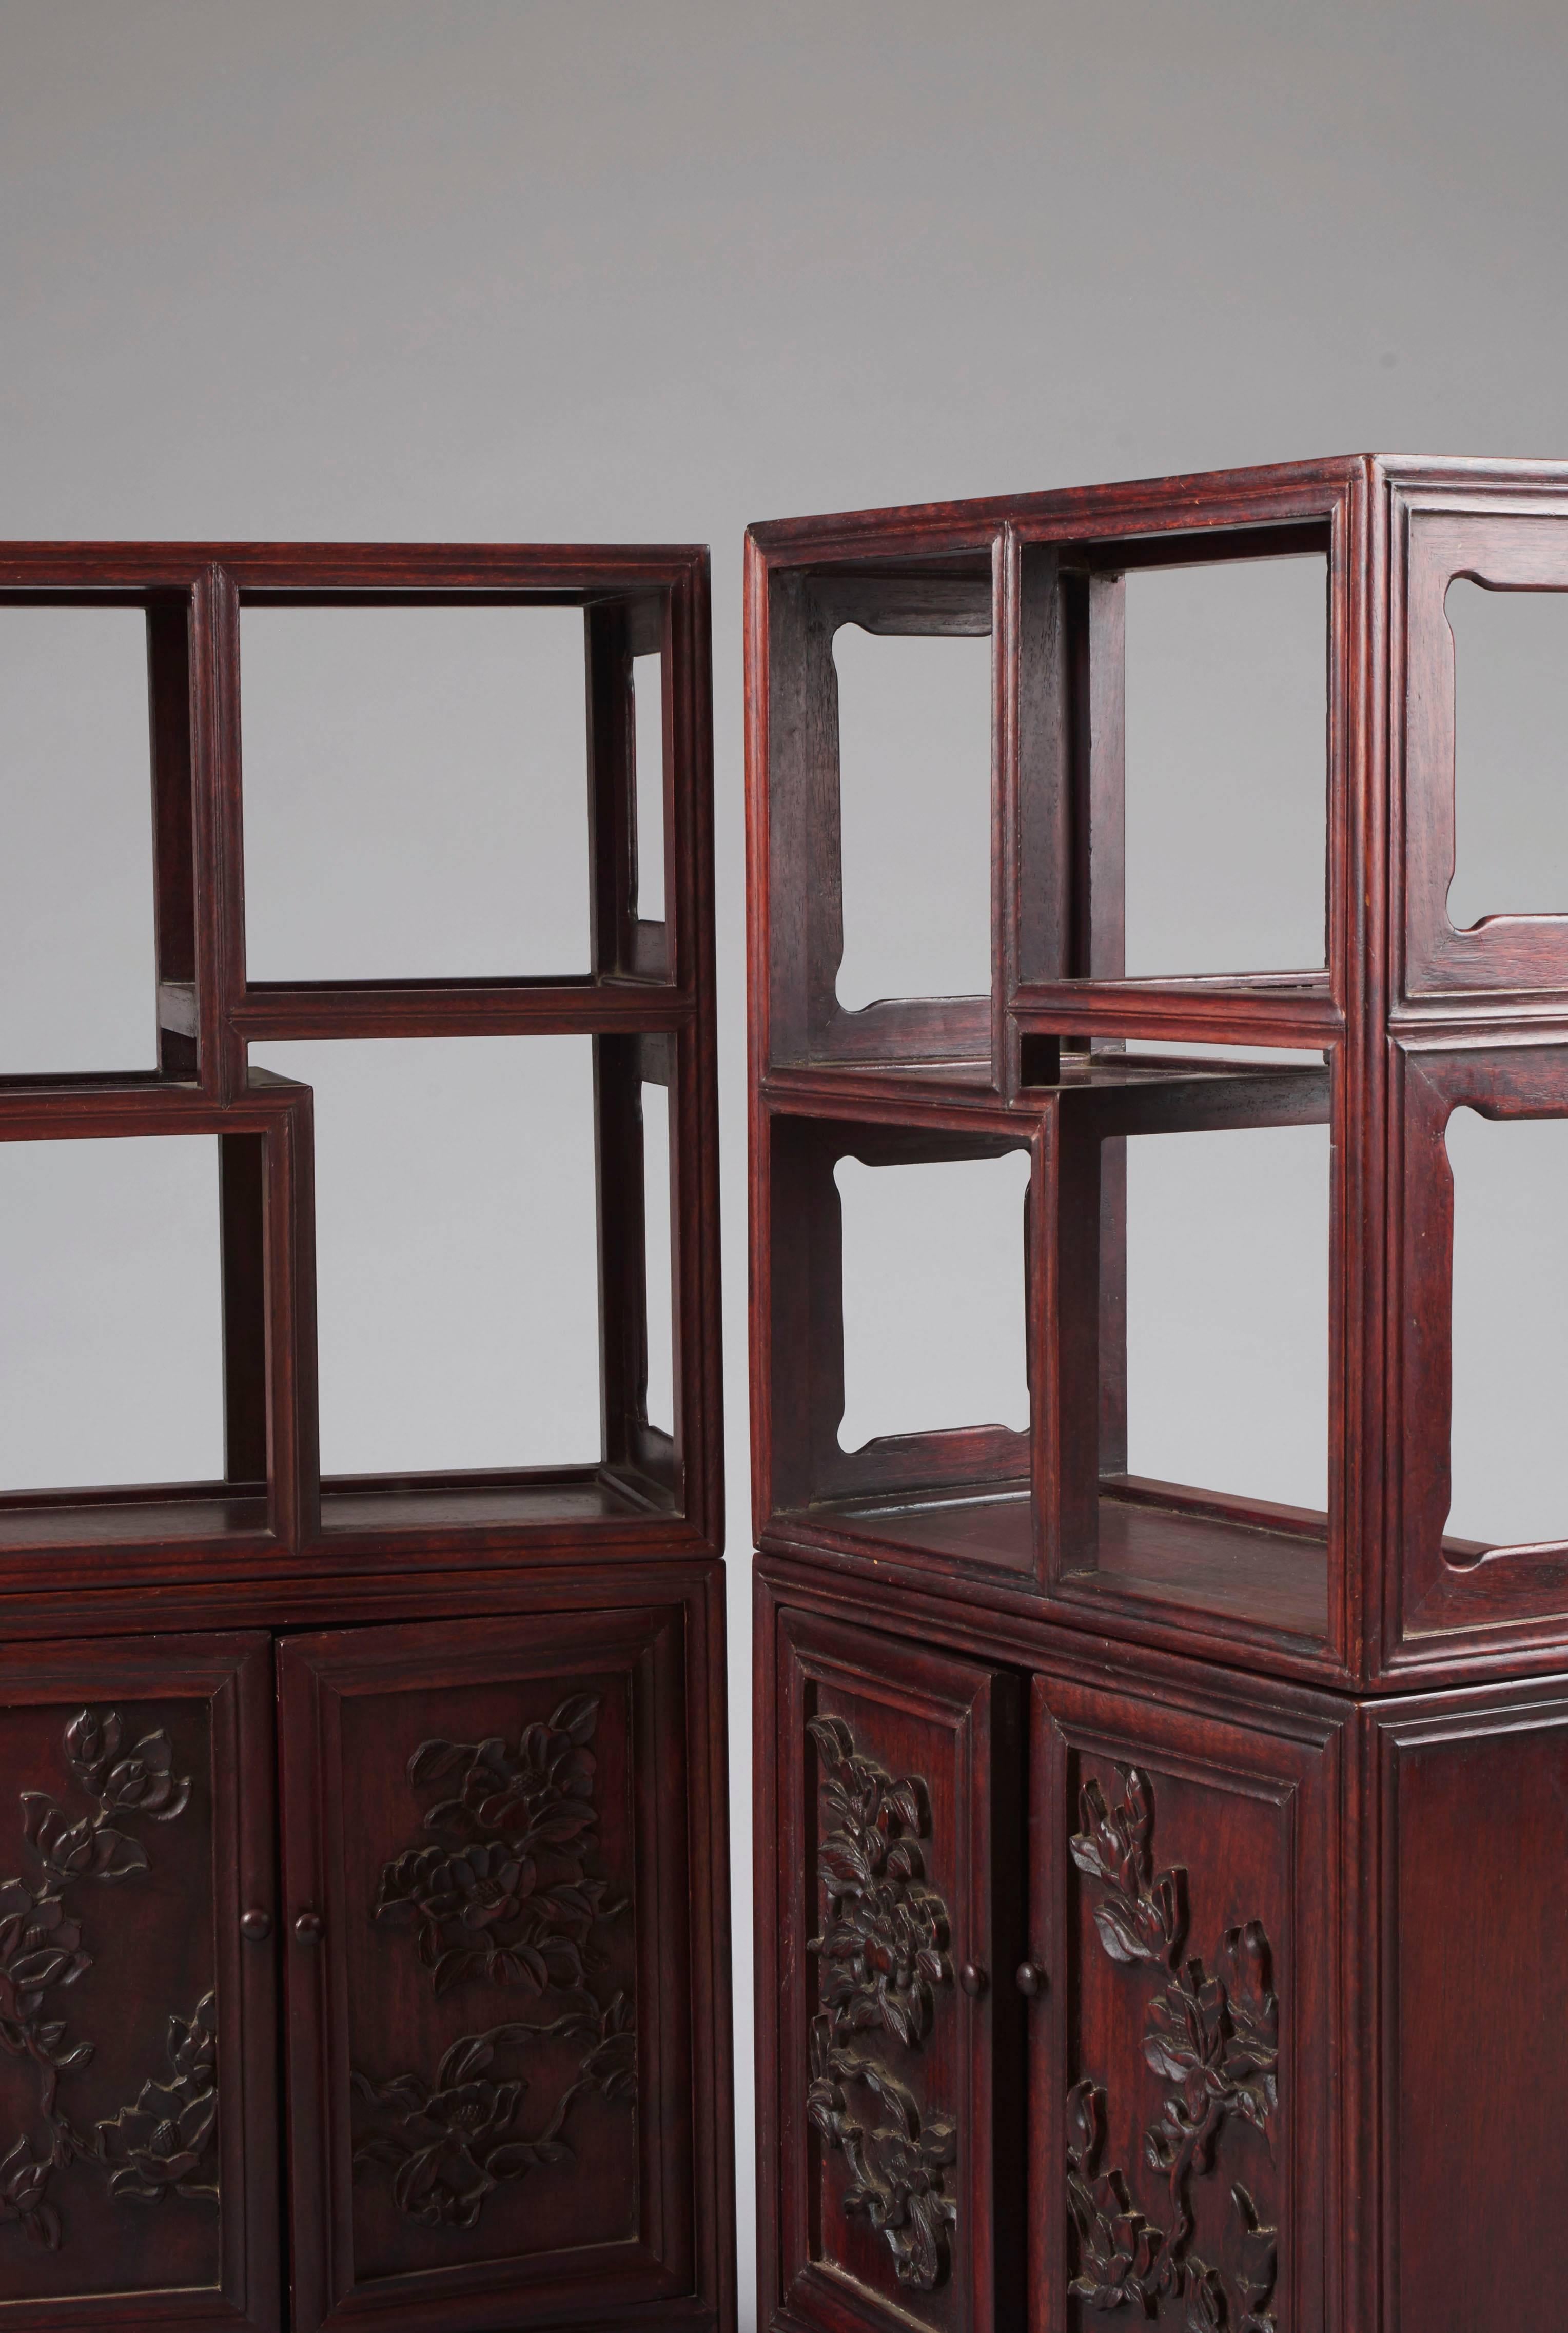 Very refined pair of Chinese shelves (in two parts - severable), carved pattern on the front doors, very good condition, in iron wood.
China, late 19th century
Dimensions: D.14 x H.63 x W.30.